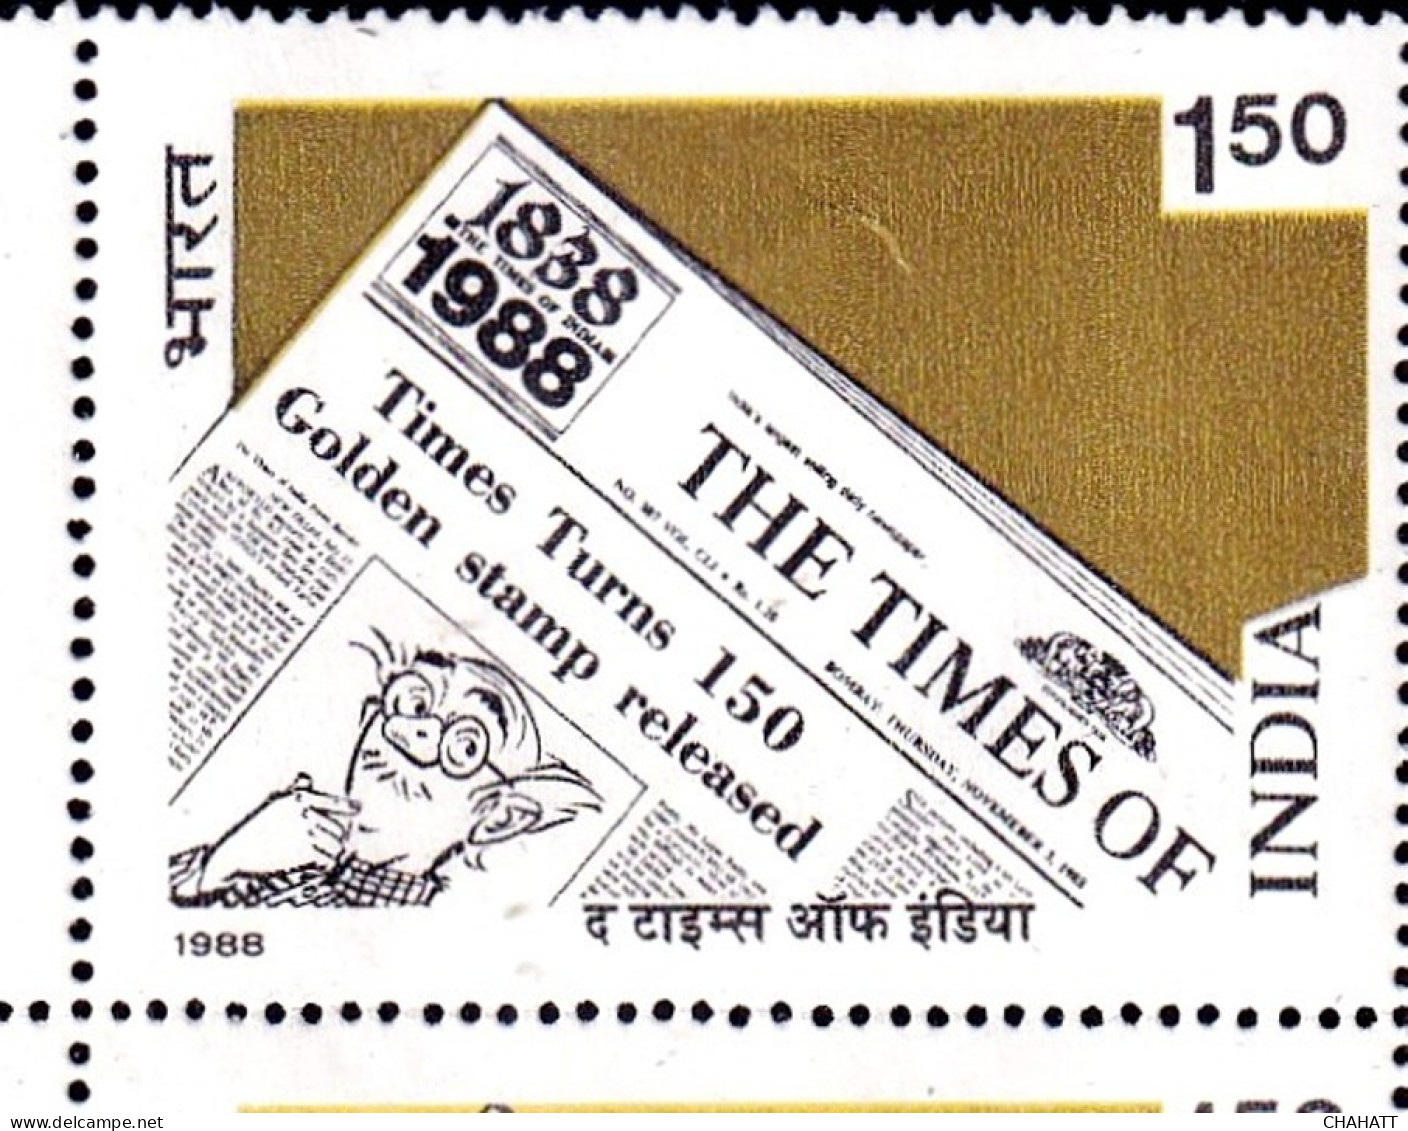 INDIA-1988-THE TIMES OF INDIA-BLOCK OF 4-ERROR- GOLD PHOSPHOR MISSING-DRY PRINT-MNH-IE-48 - Plaatfouten En Curiosa